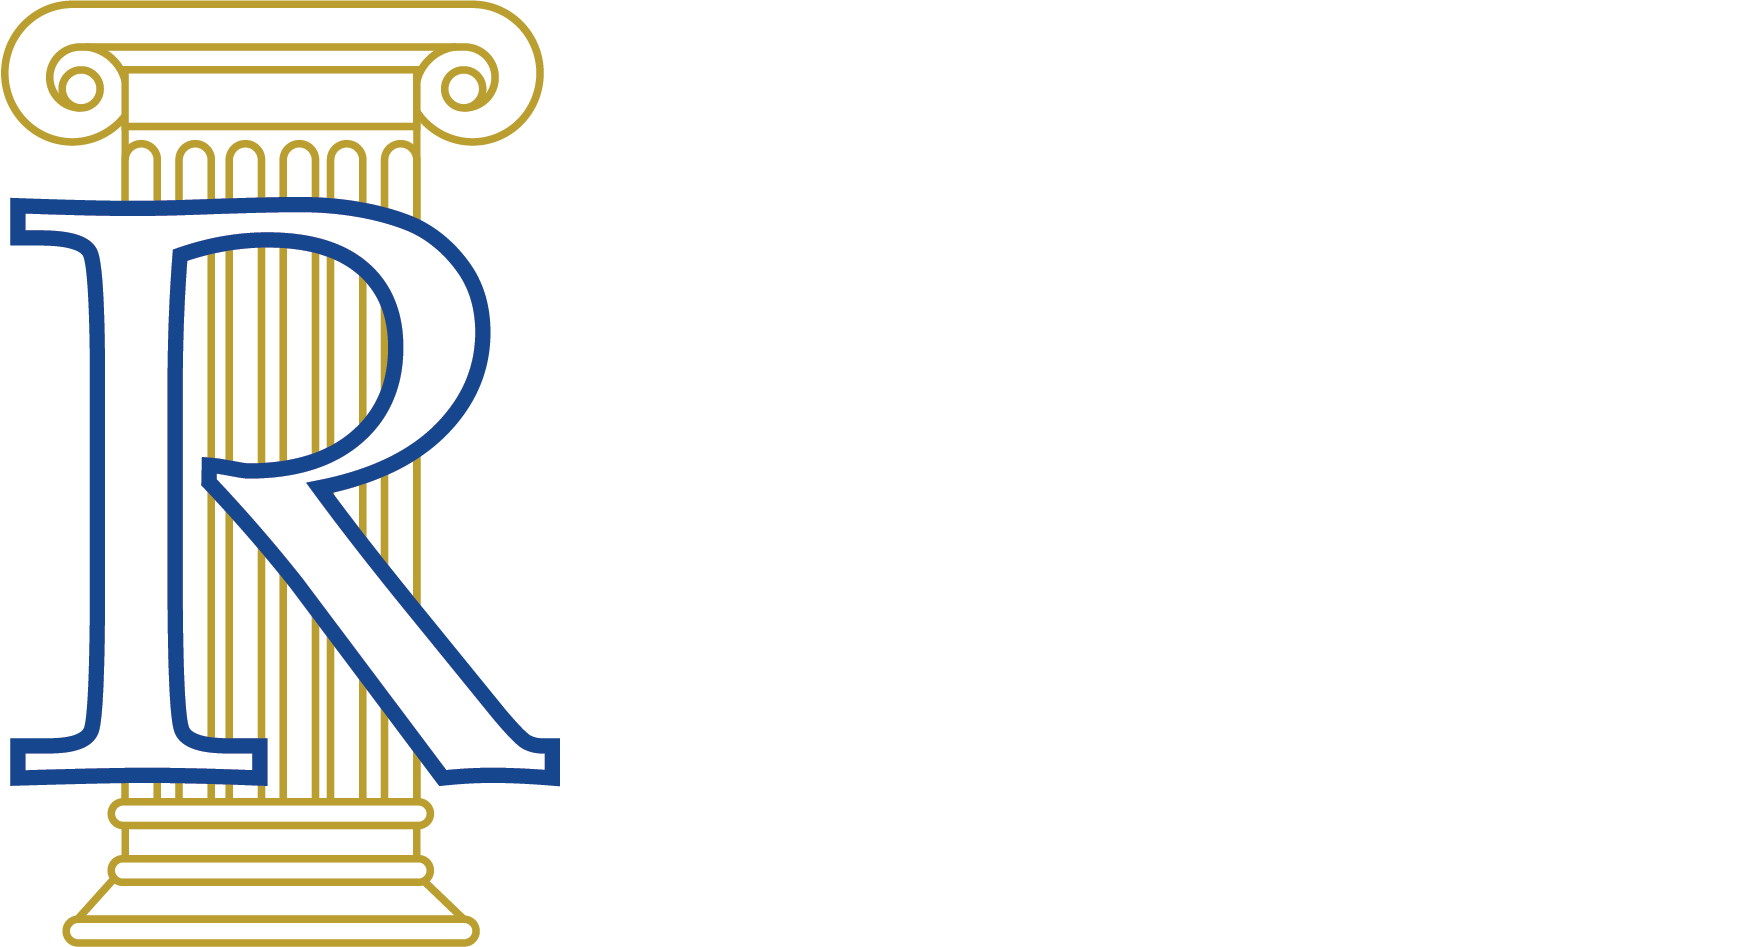 Broomfield Logo - Rundus Funeral Home | Broomfield, CO | Cremation